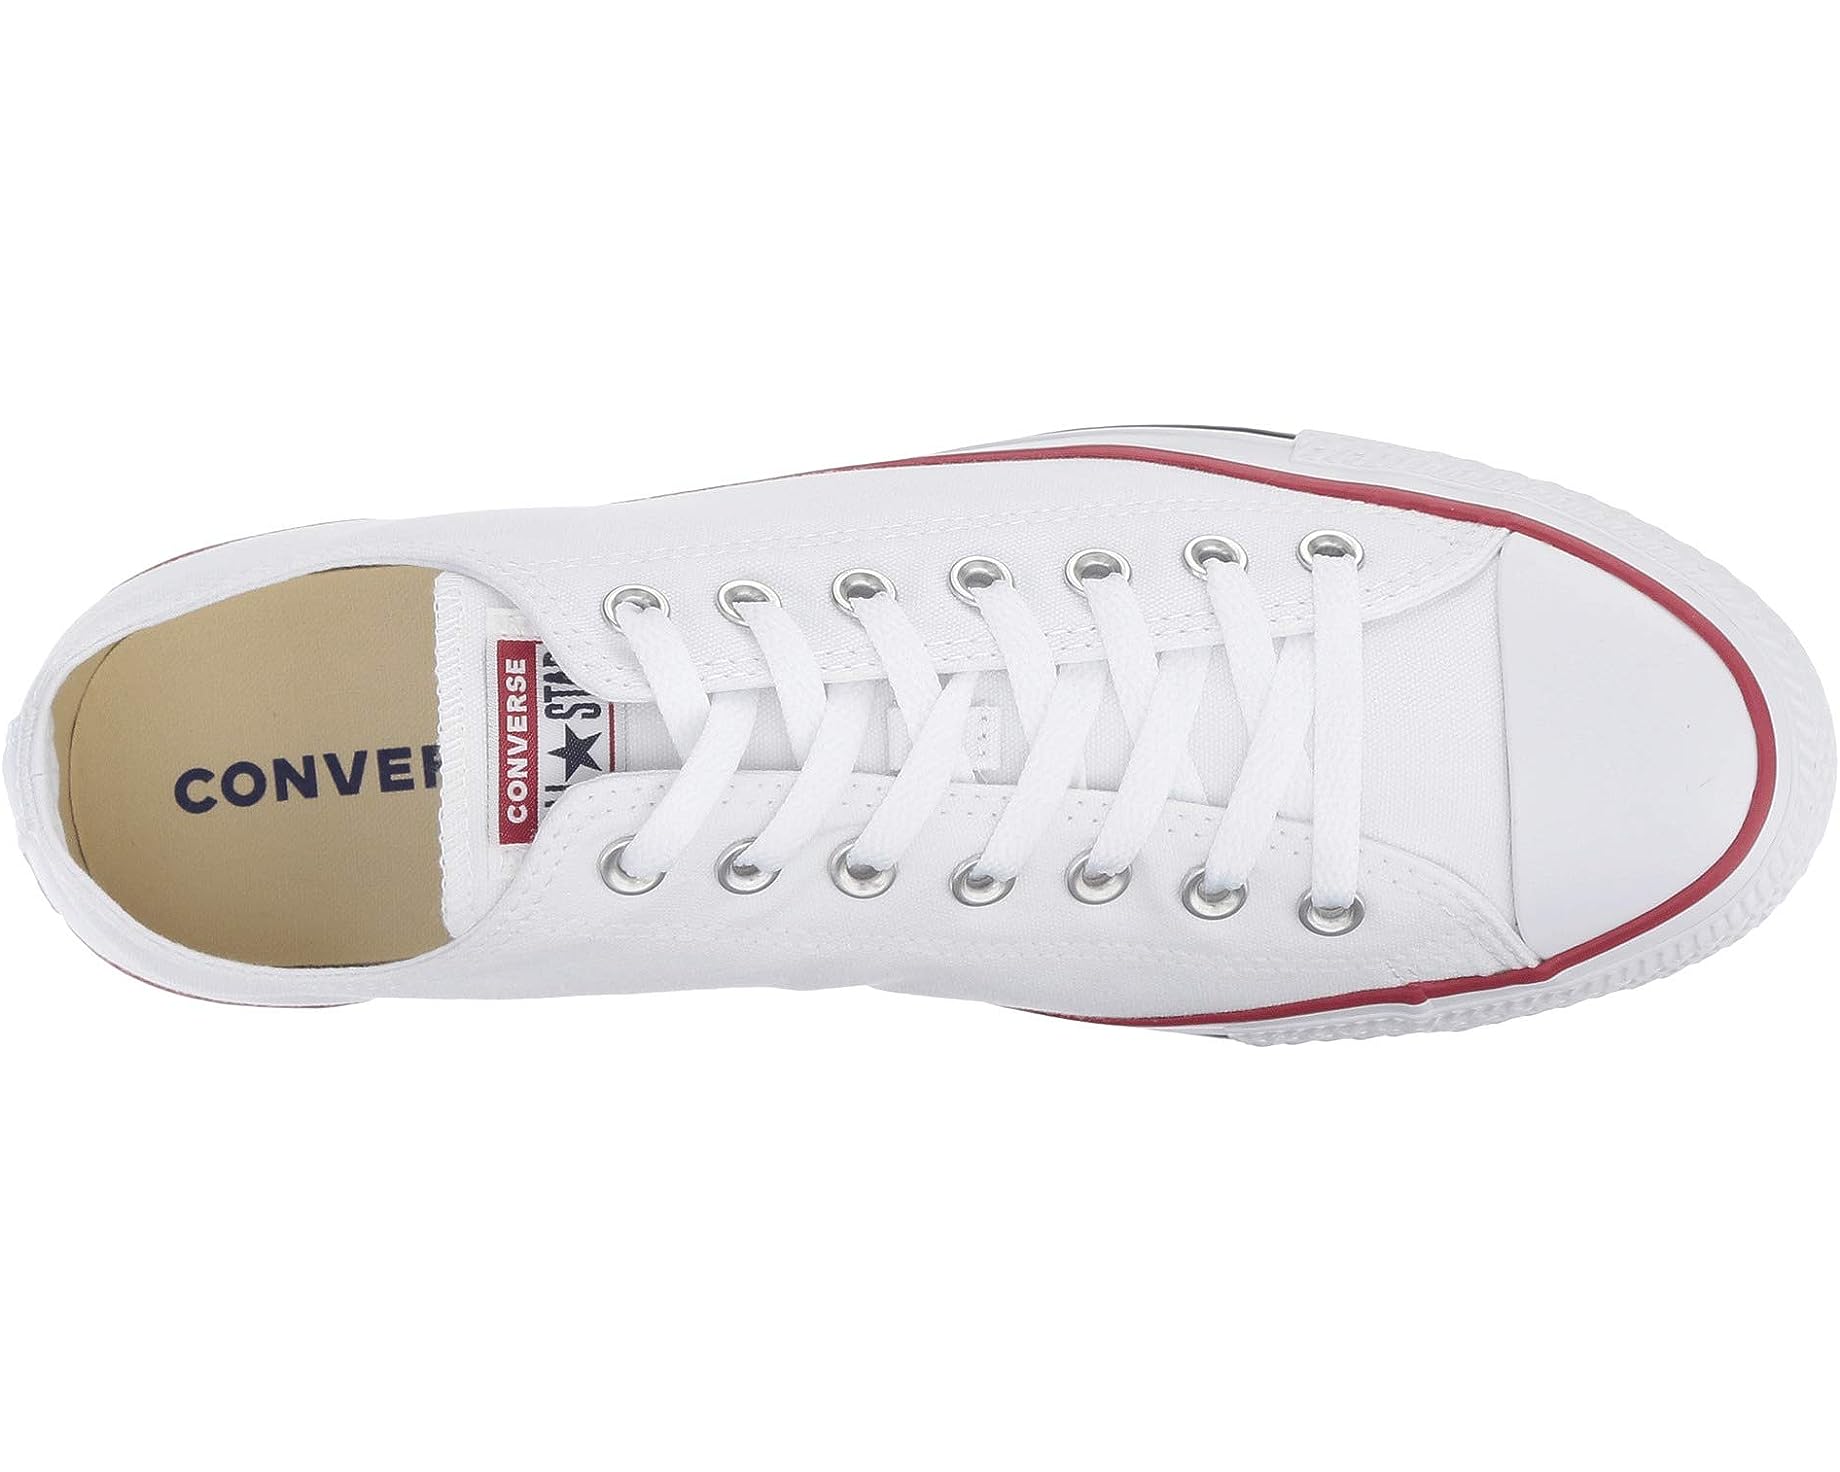 Converse Men's Chuck Taylor All Star Sneakers - Canvas.